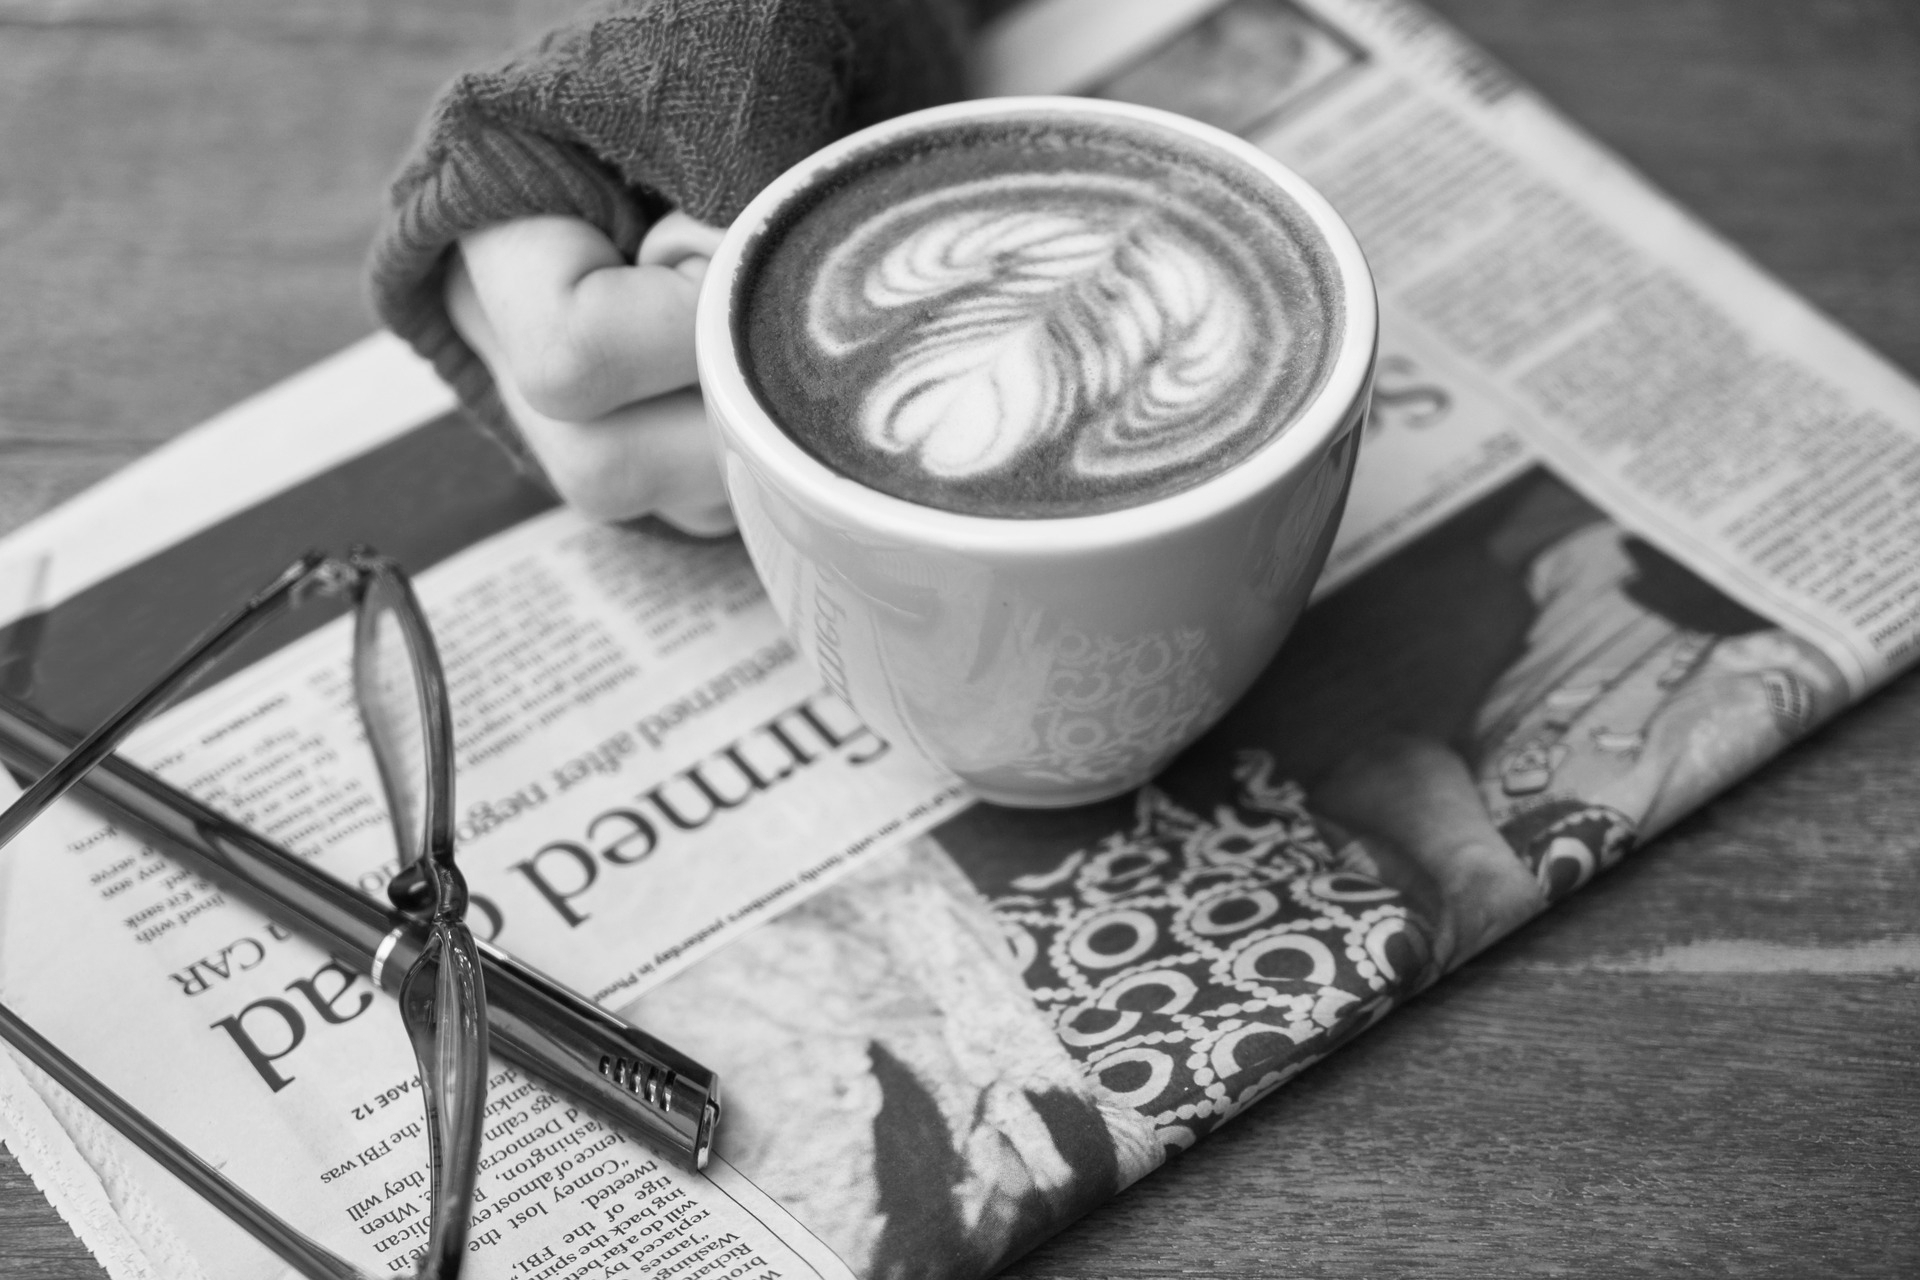 A hand holds a latte resting on a newspaper.